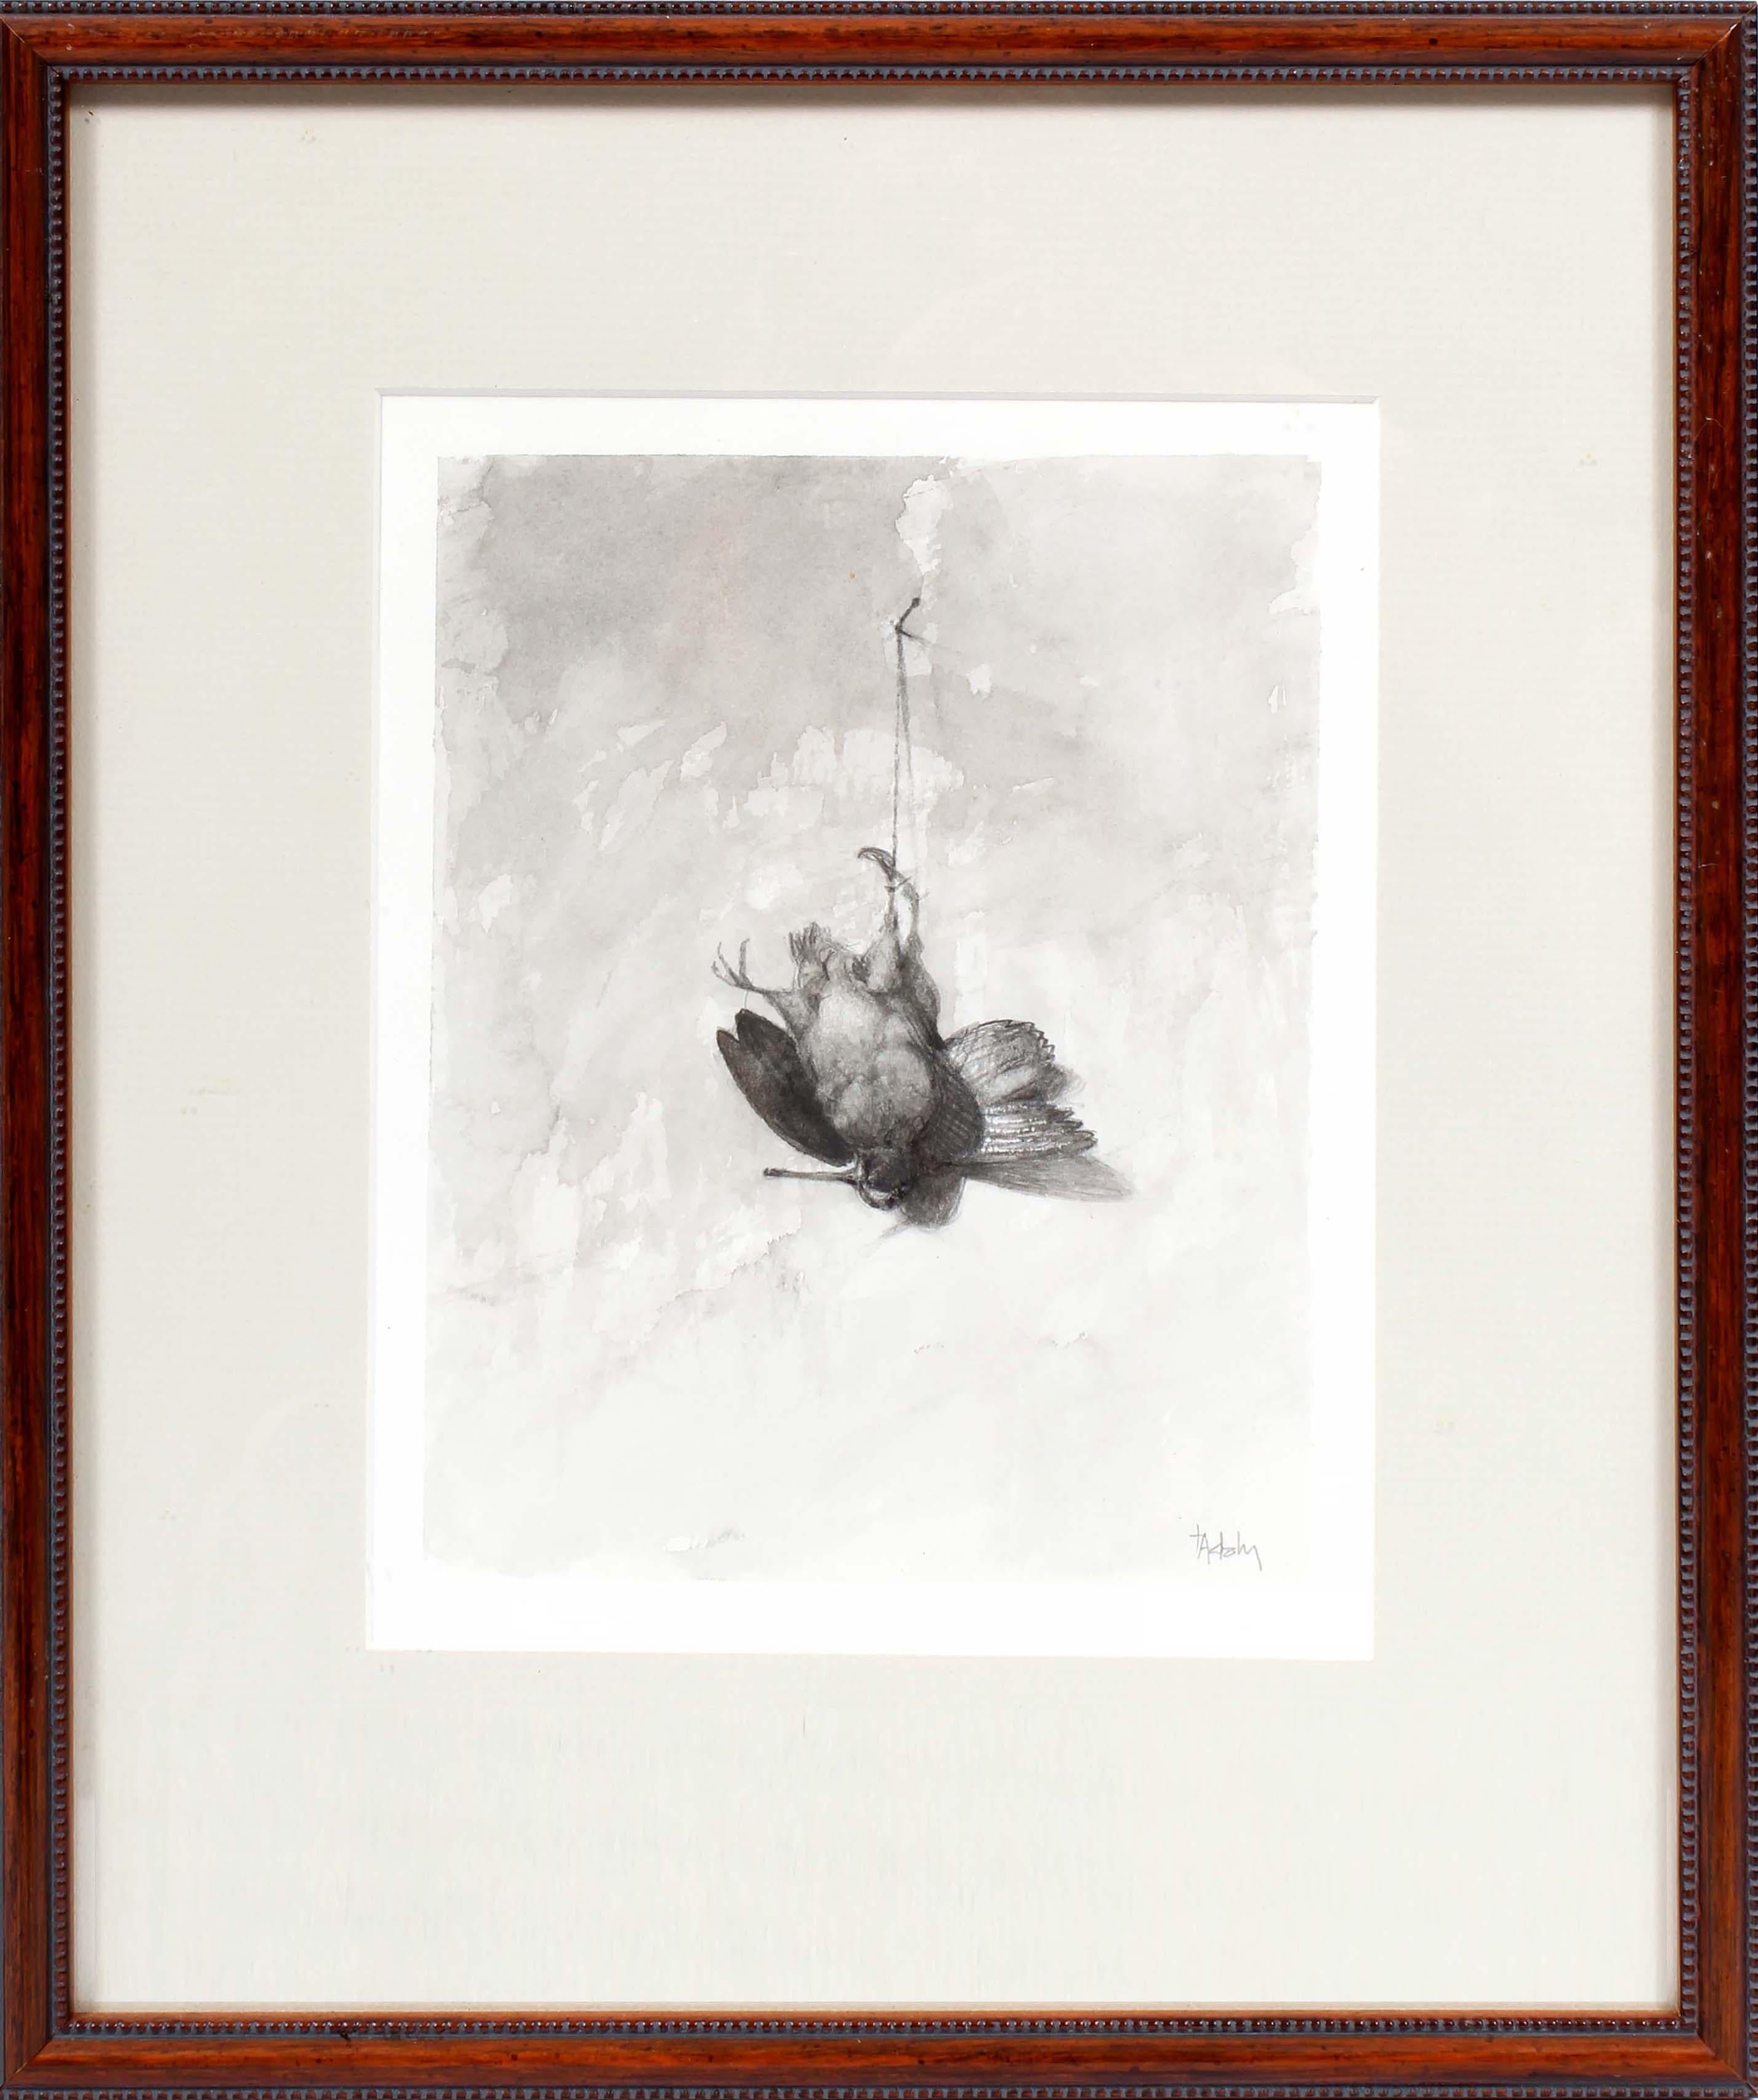 An original watercolor by American artist Thomas Aquinas Daly.

This work comes housed in an archival frame presentation.